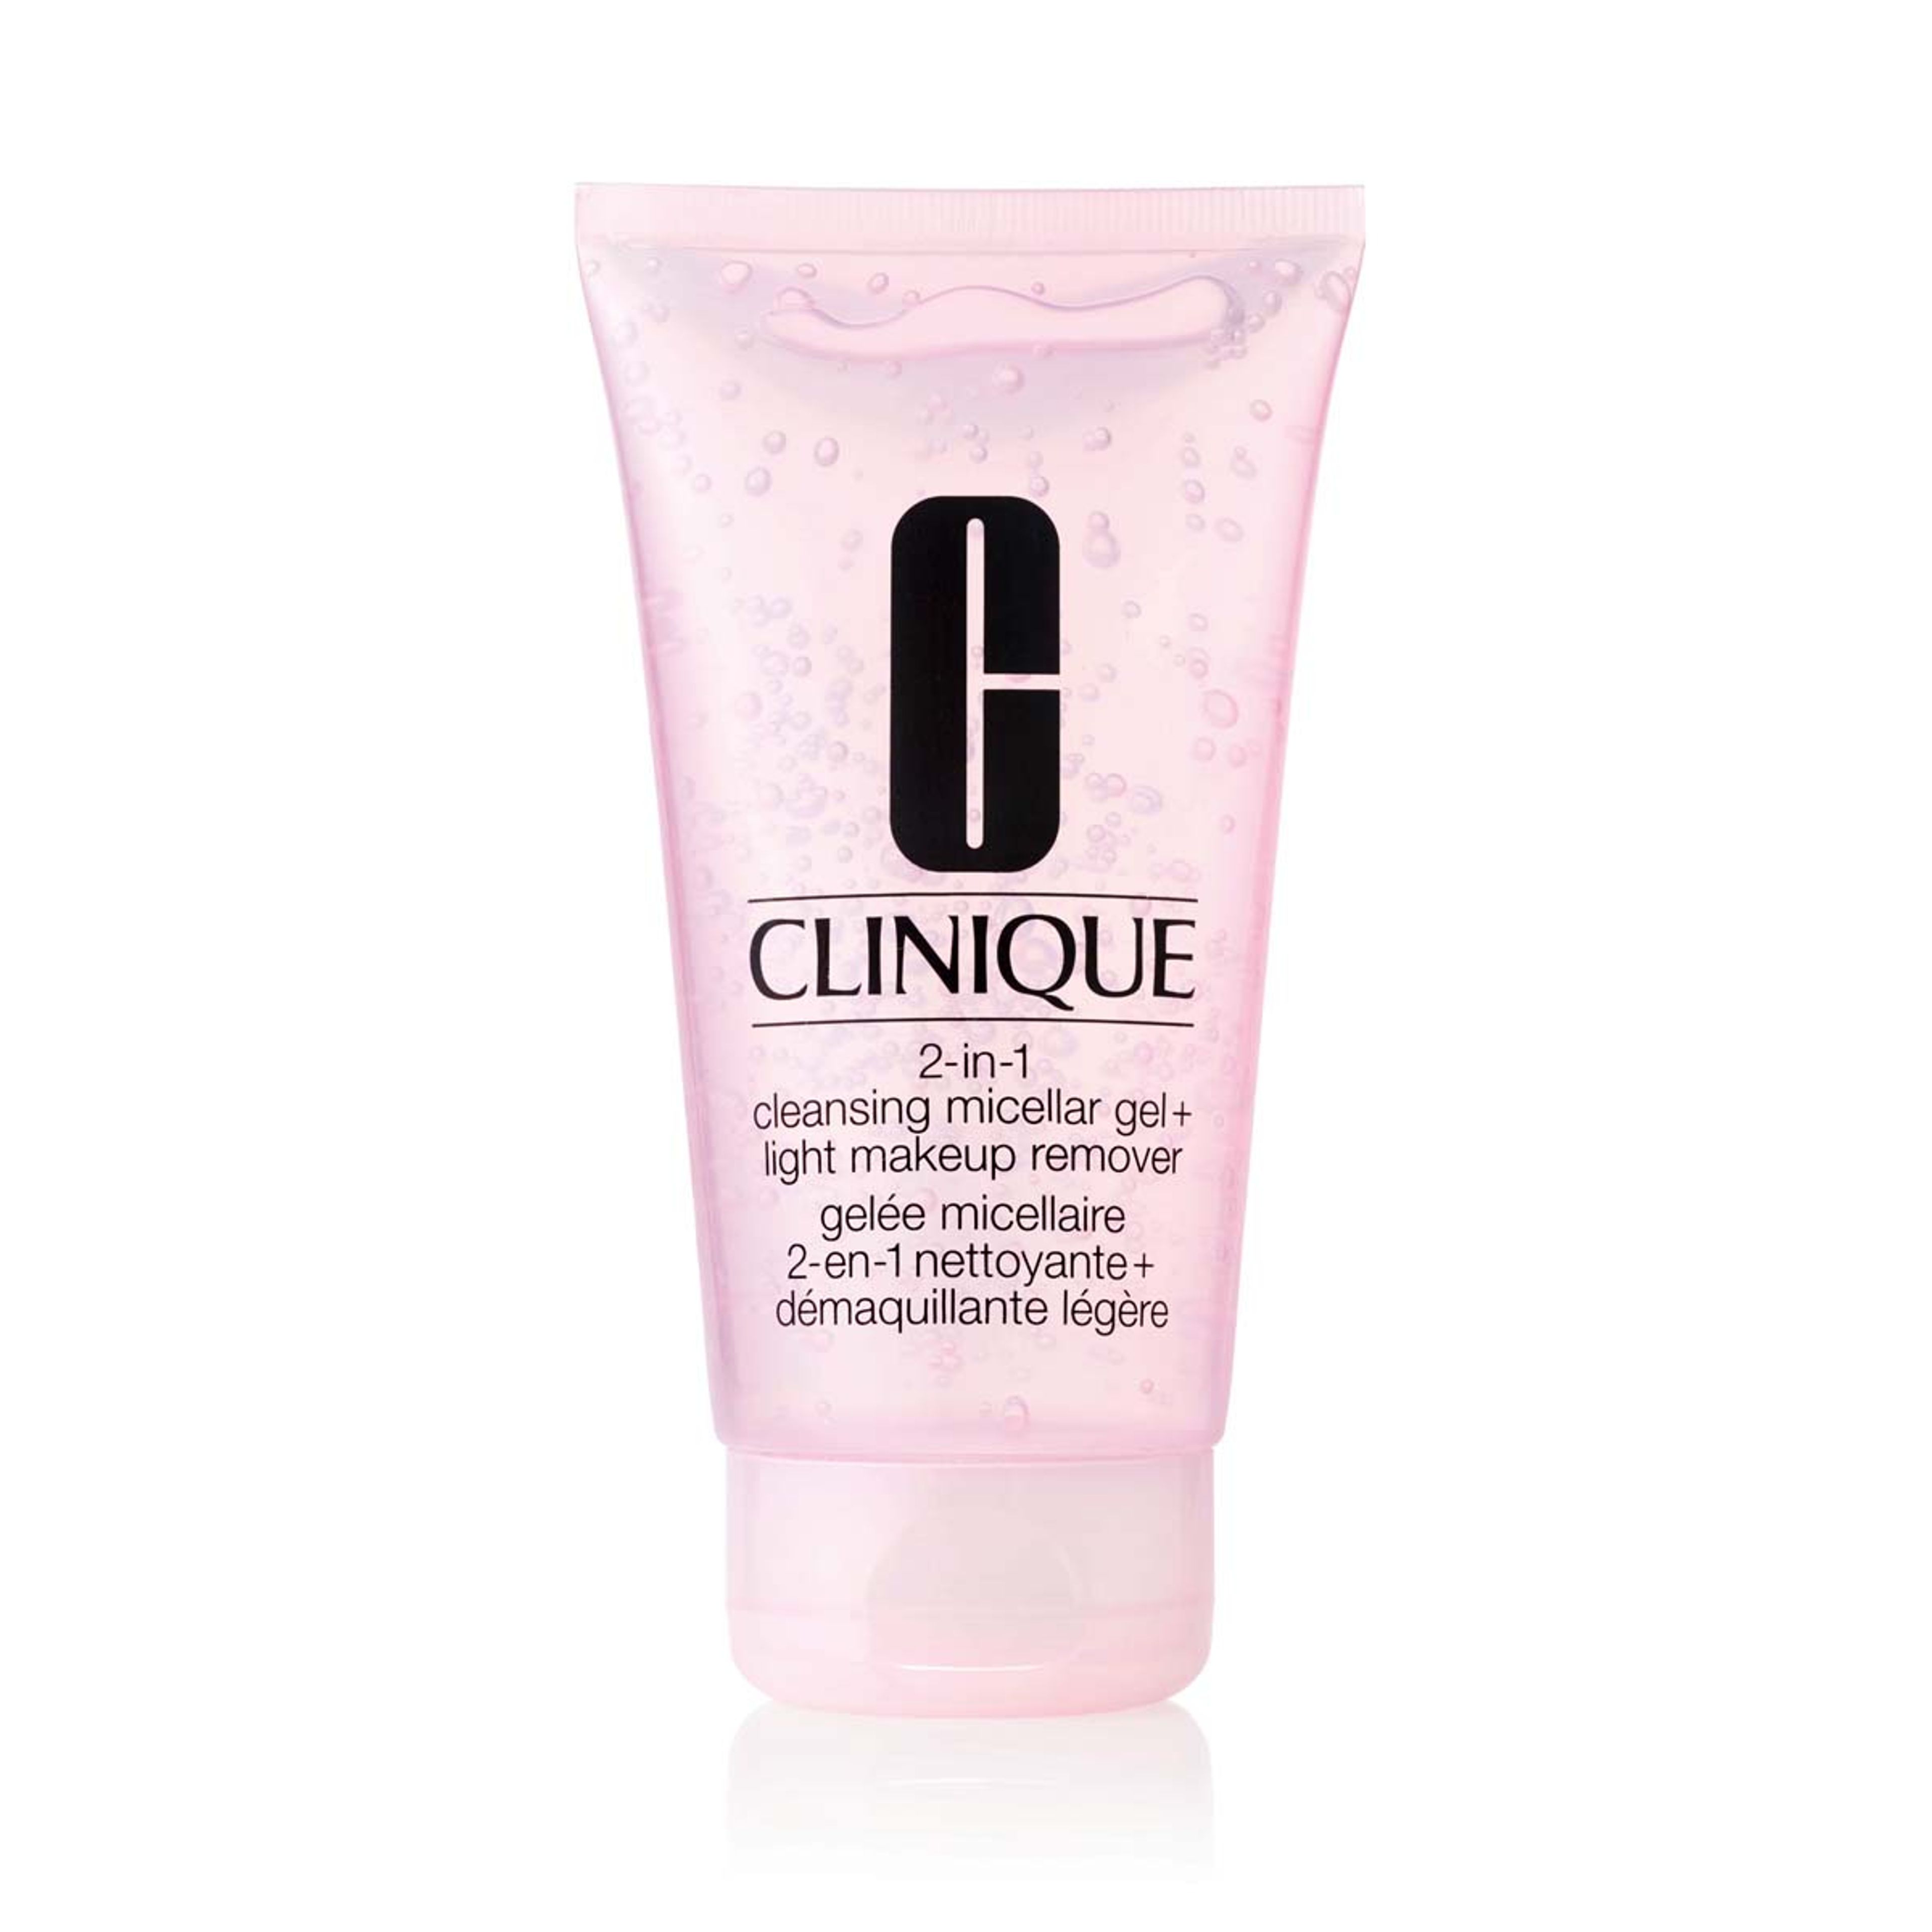 Clinique 2 In 1 Cleansing Micellar Gel + Light Makeup Remover 1